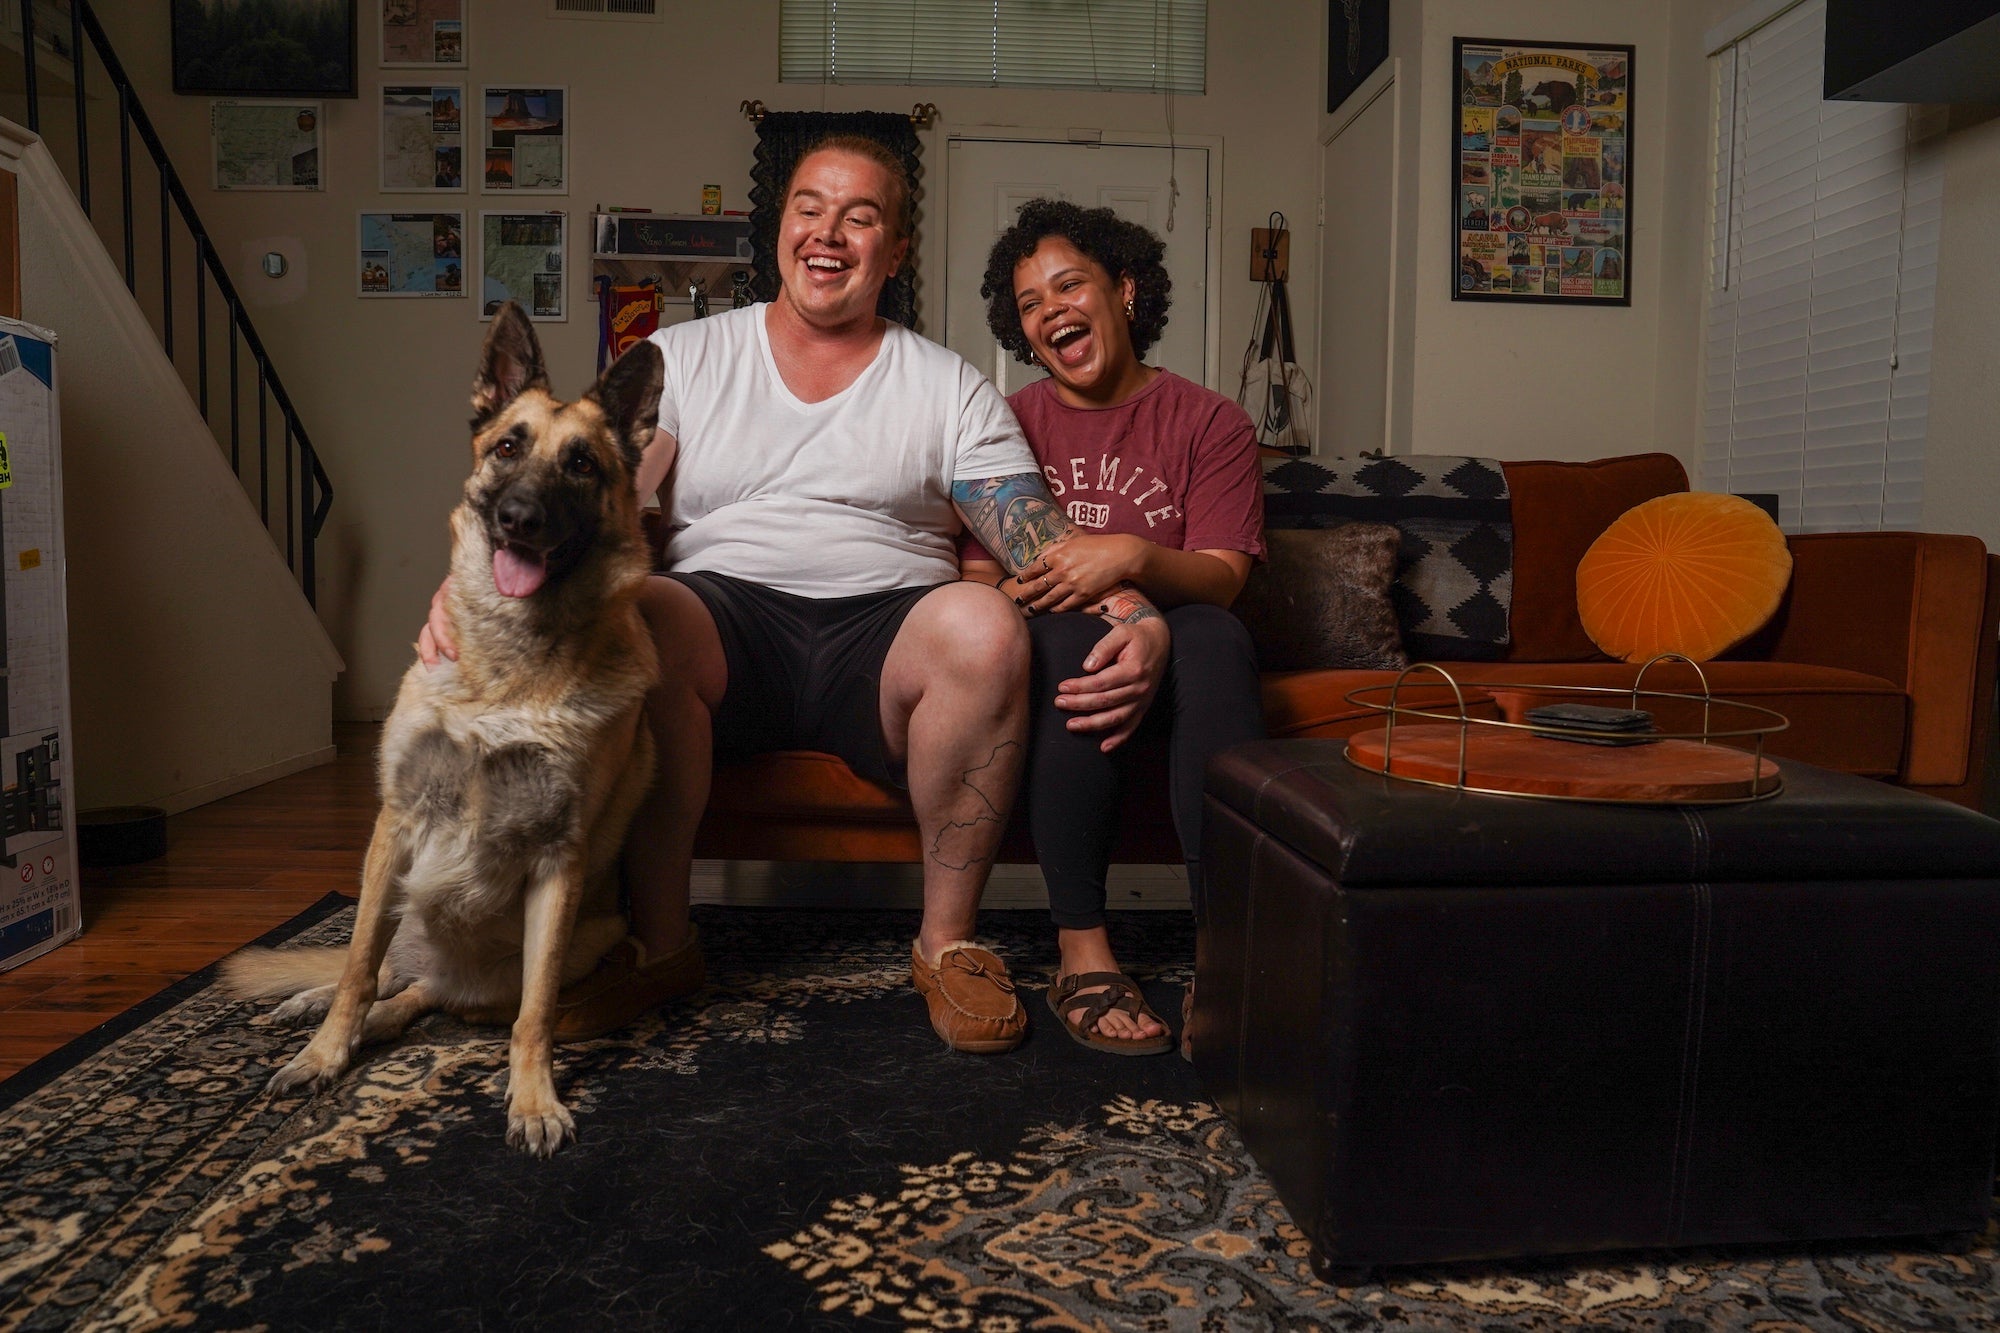 Matthew Treviño, Emily Fletcher and their dog Rosie, a german shepherd mix, sit on a couch at their home in Sacramento. Matthew is part of a ˽̳ Davis Health clinical trial for a hormonal birth control gel for men.